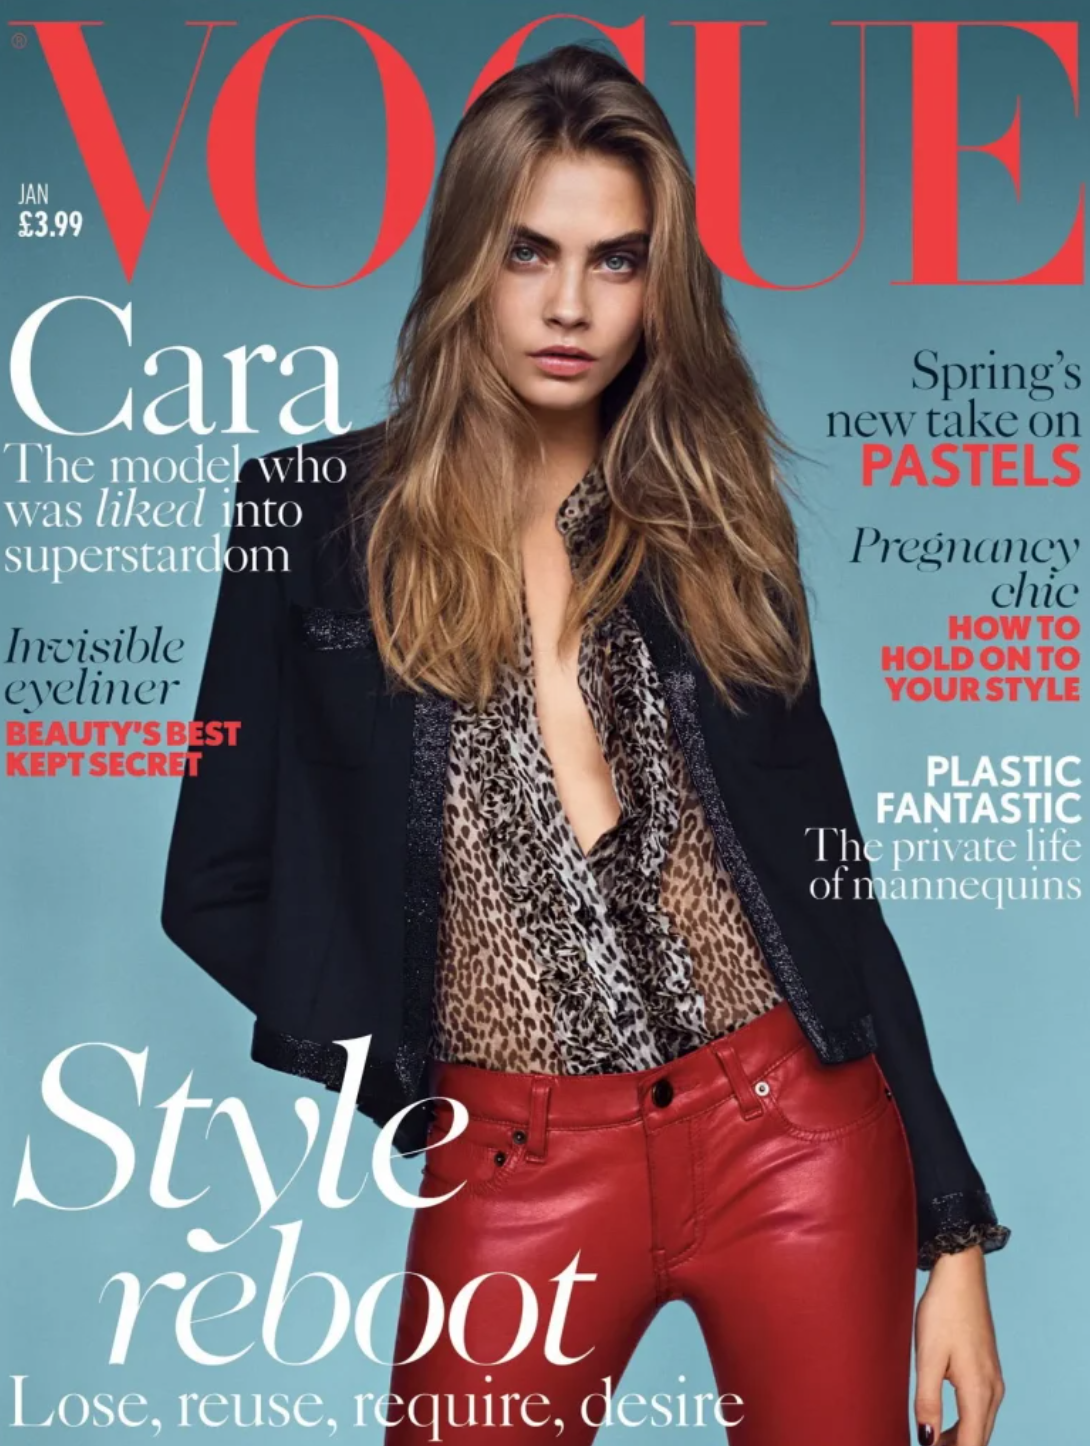 Cara Delevingne standing center on the cover, against a light blue background with large VOGUE text in red behind her head